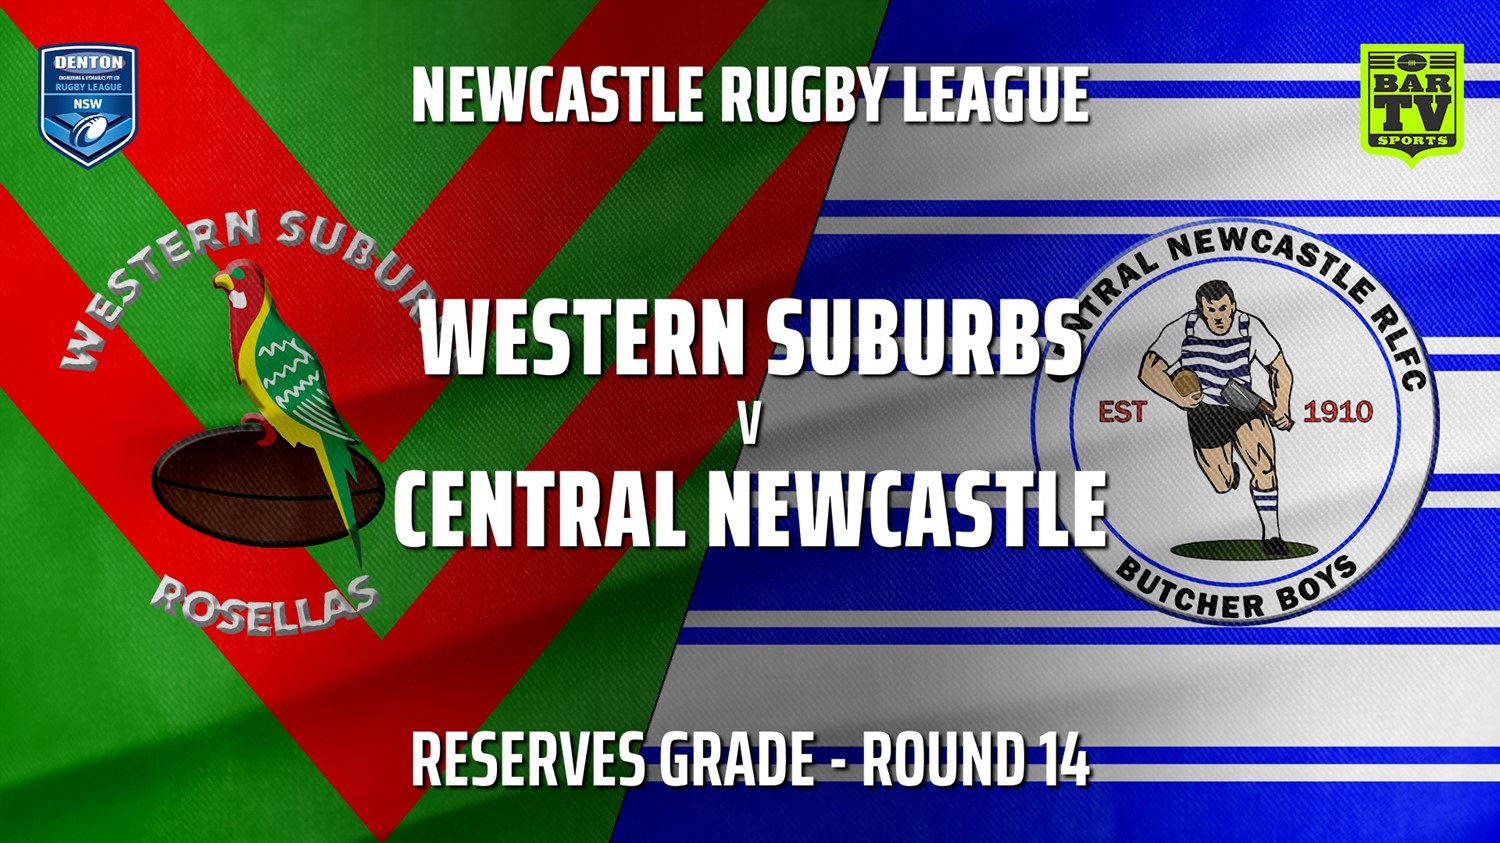 210711-Newcastle Round 14 - Reserves Grade - Western Suburbs Rosellas v Central Newcastle Slate Image